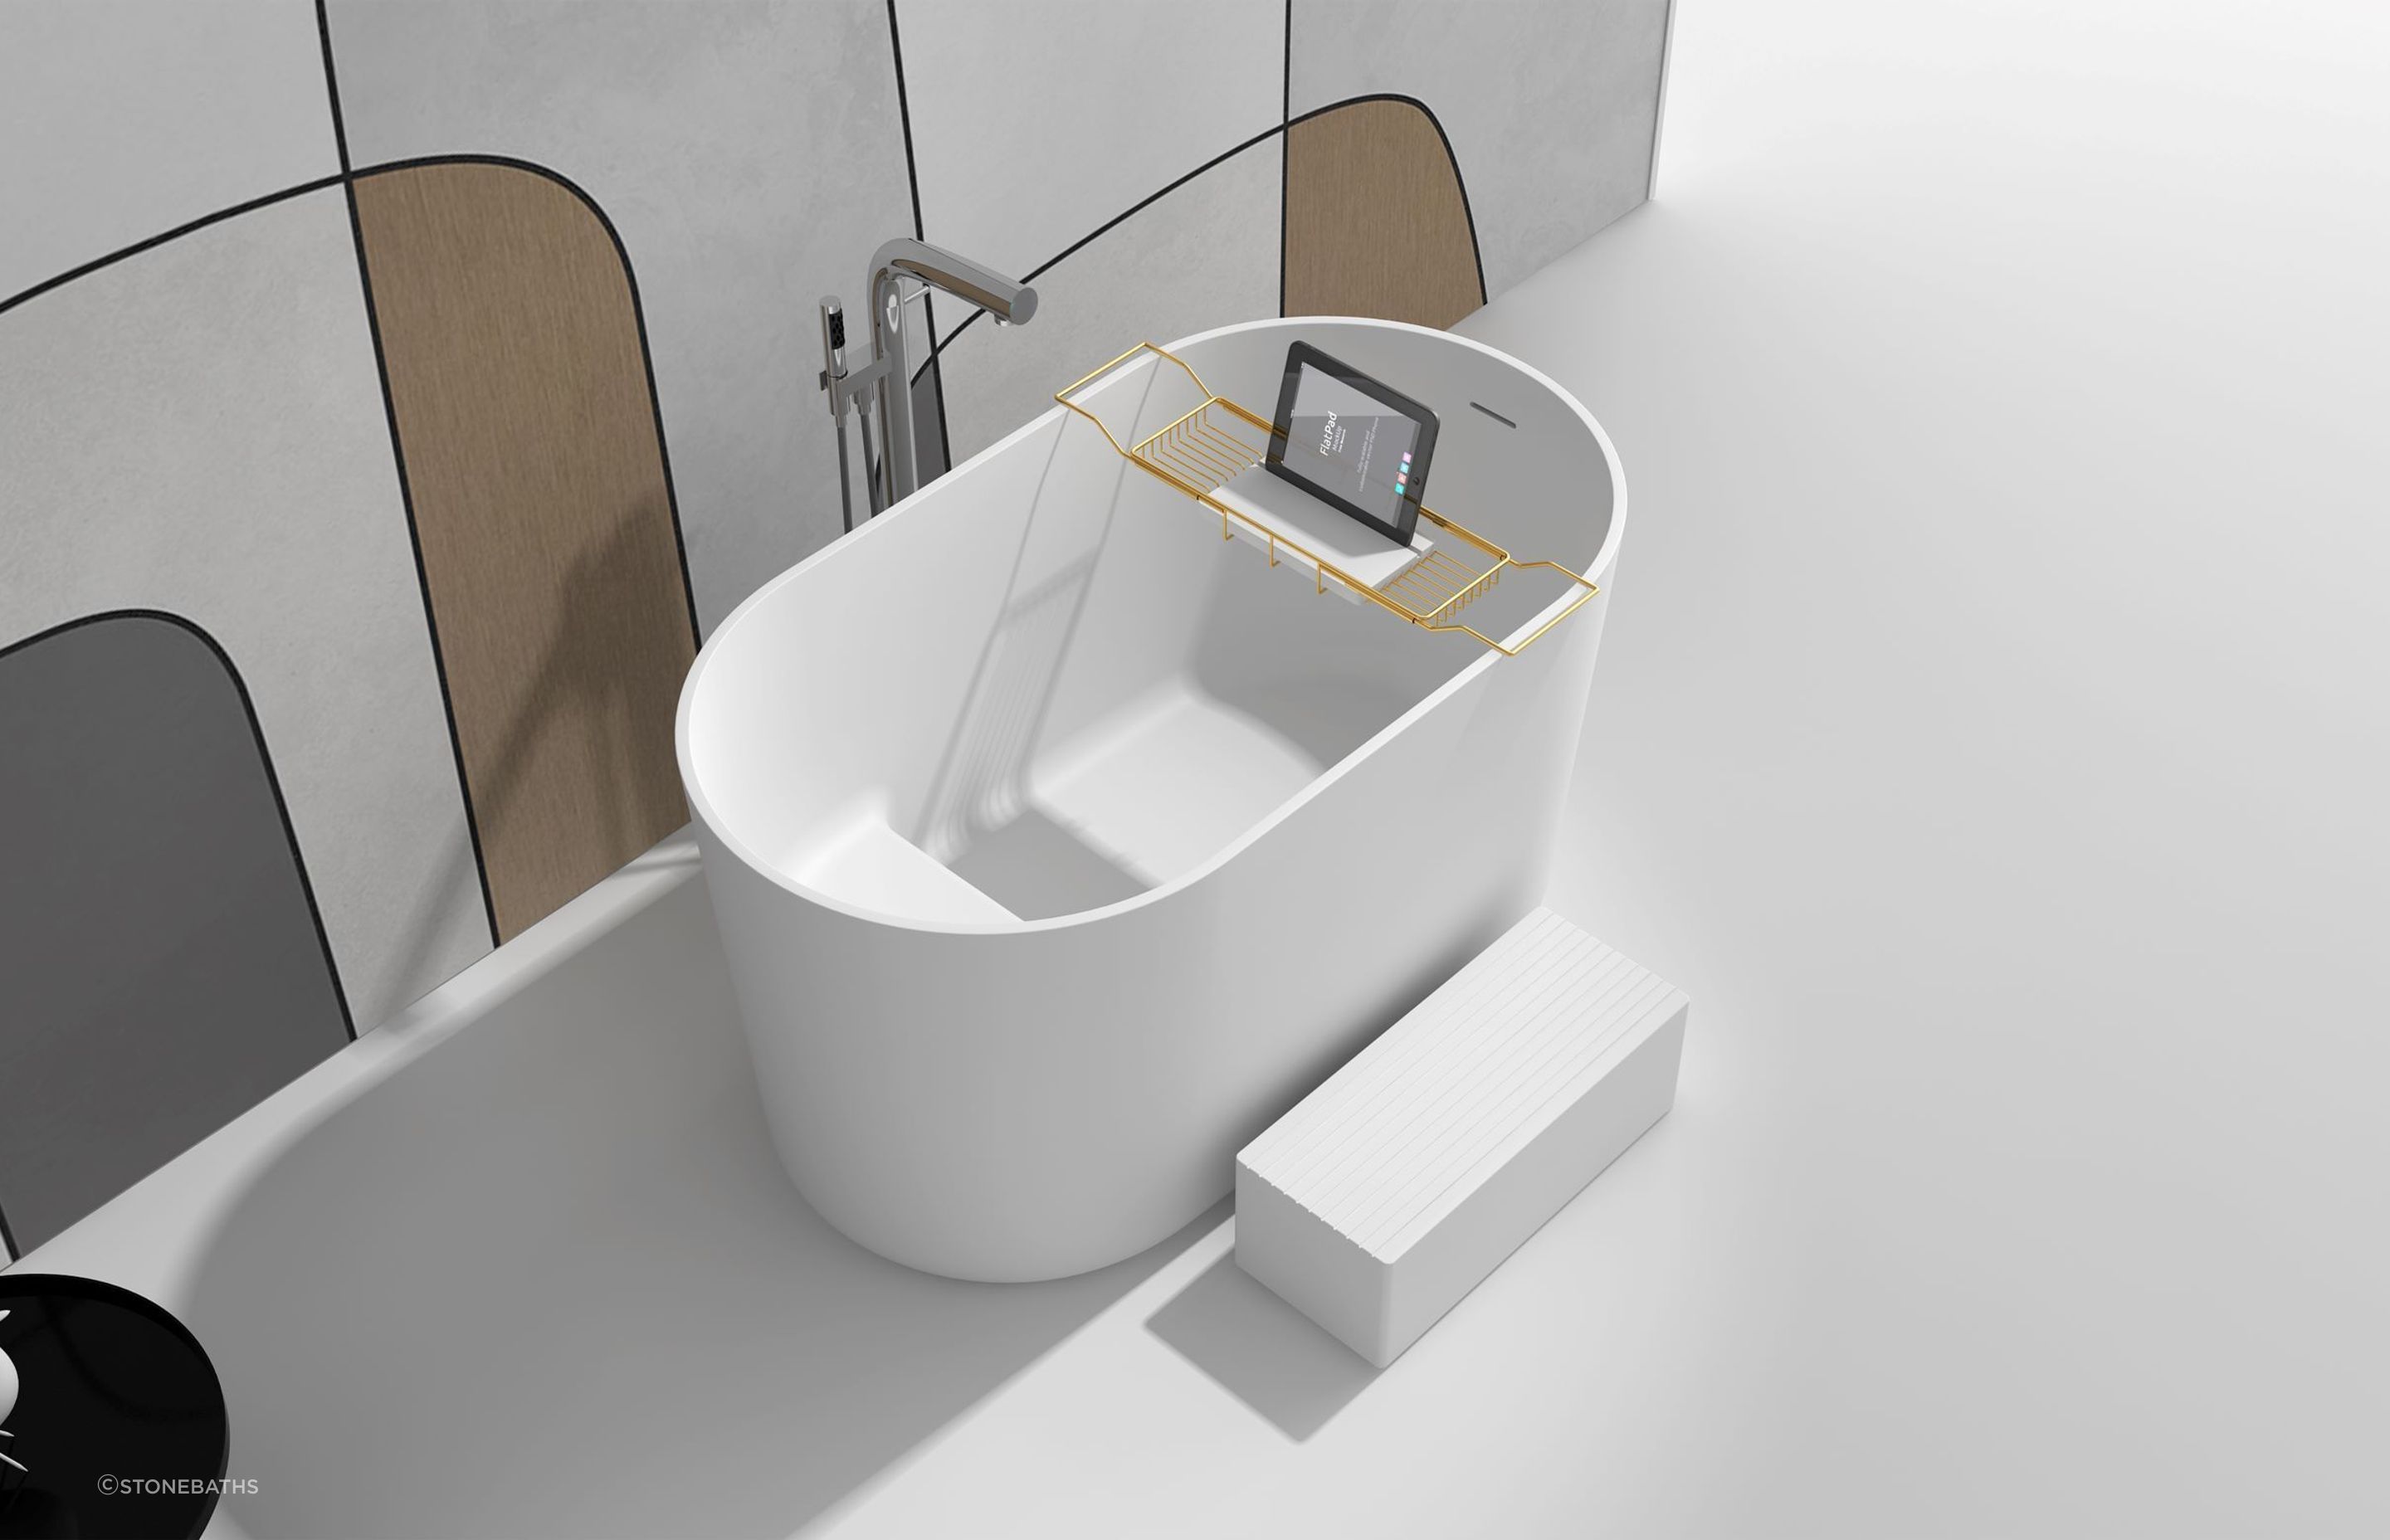 With a built in seat for comfortable, upright soaking, the Gia Freestanding Soak Tub is indulgence personified